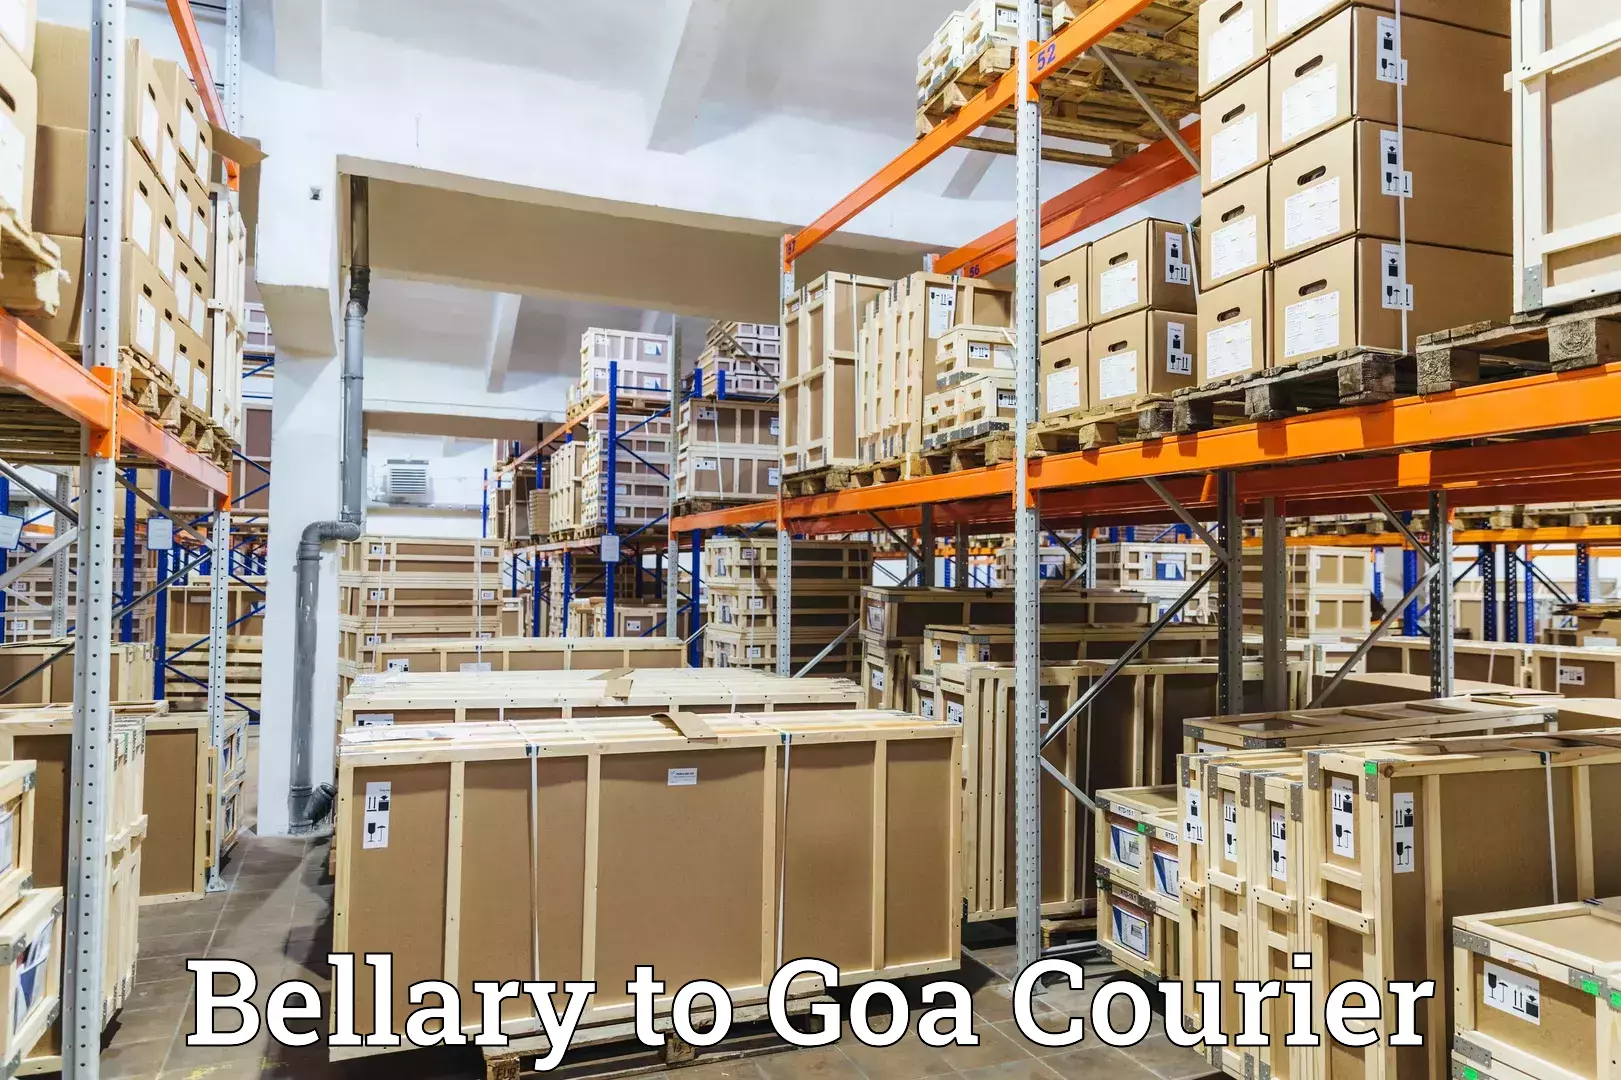 On-call courier service in Bellary to Vasco da Gama